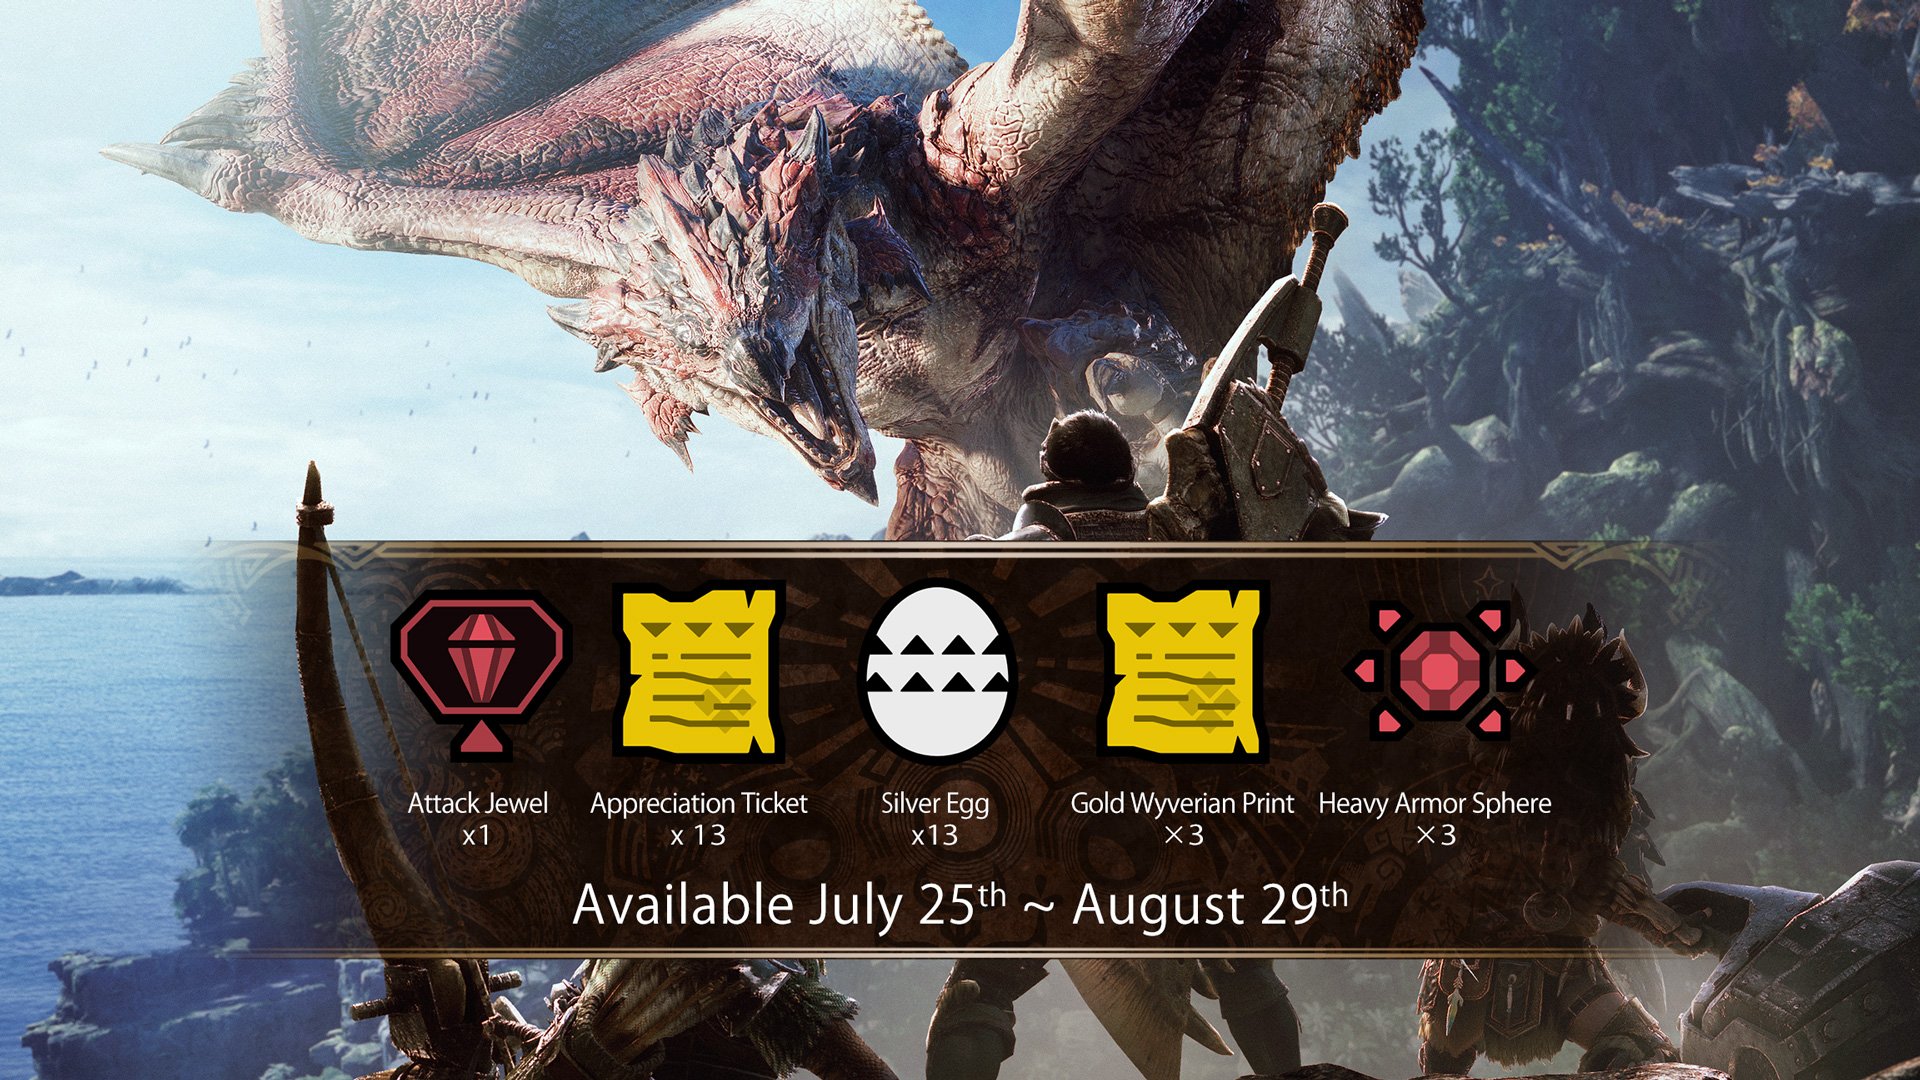 Monster Hunter Hunters Our Mhworld Commemorative Item Pack Is Now Live On All Platforms Claim Your Daily Login Bonus And Enjoy This Special Gift T Co Dtbztqdnd0